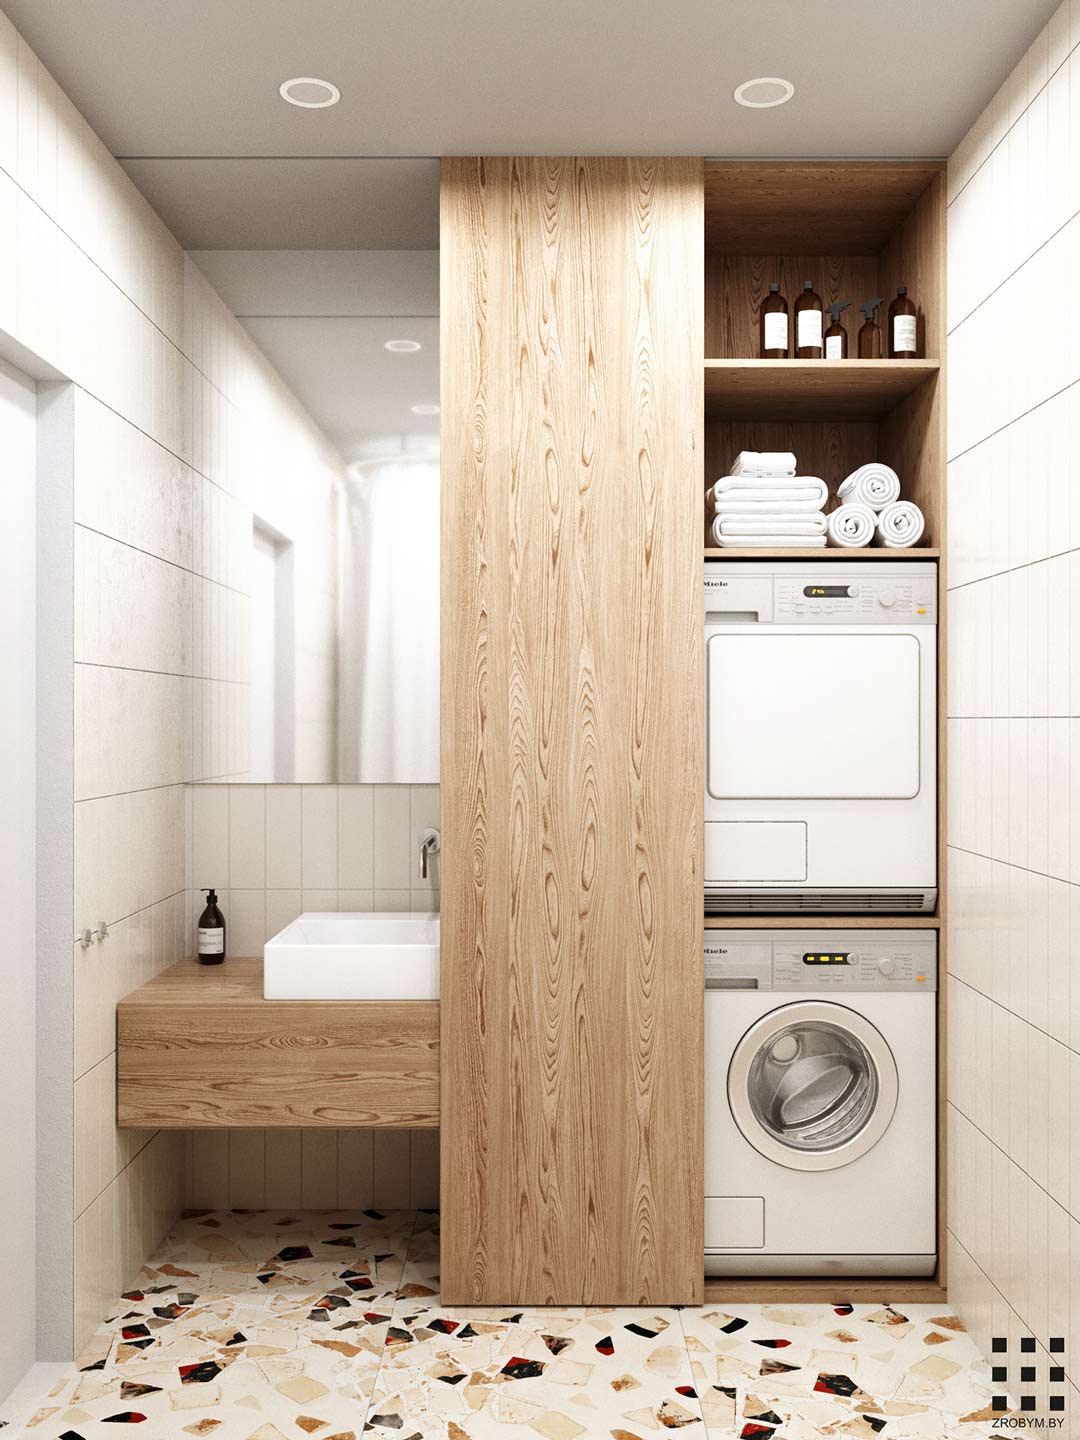 Small laundry Ideas a bathroom combined with laundry with warm timber sliding door to conceal the washing machine and terrazo floor